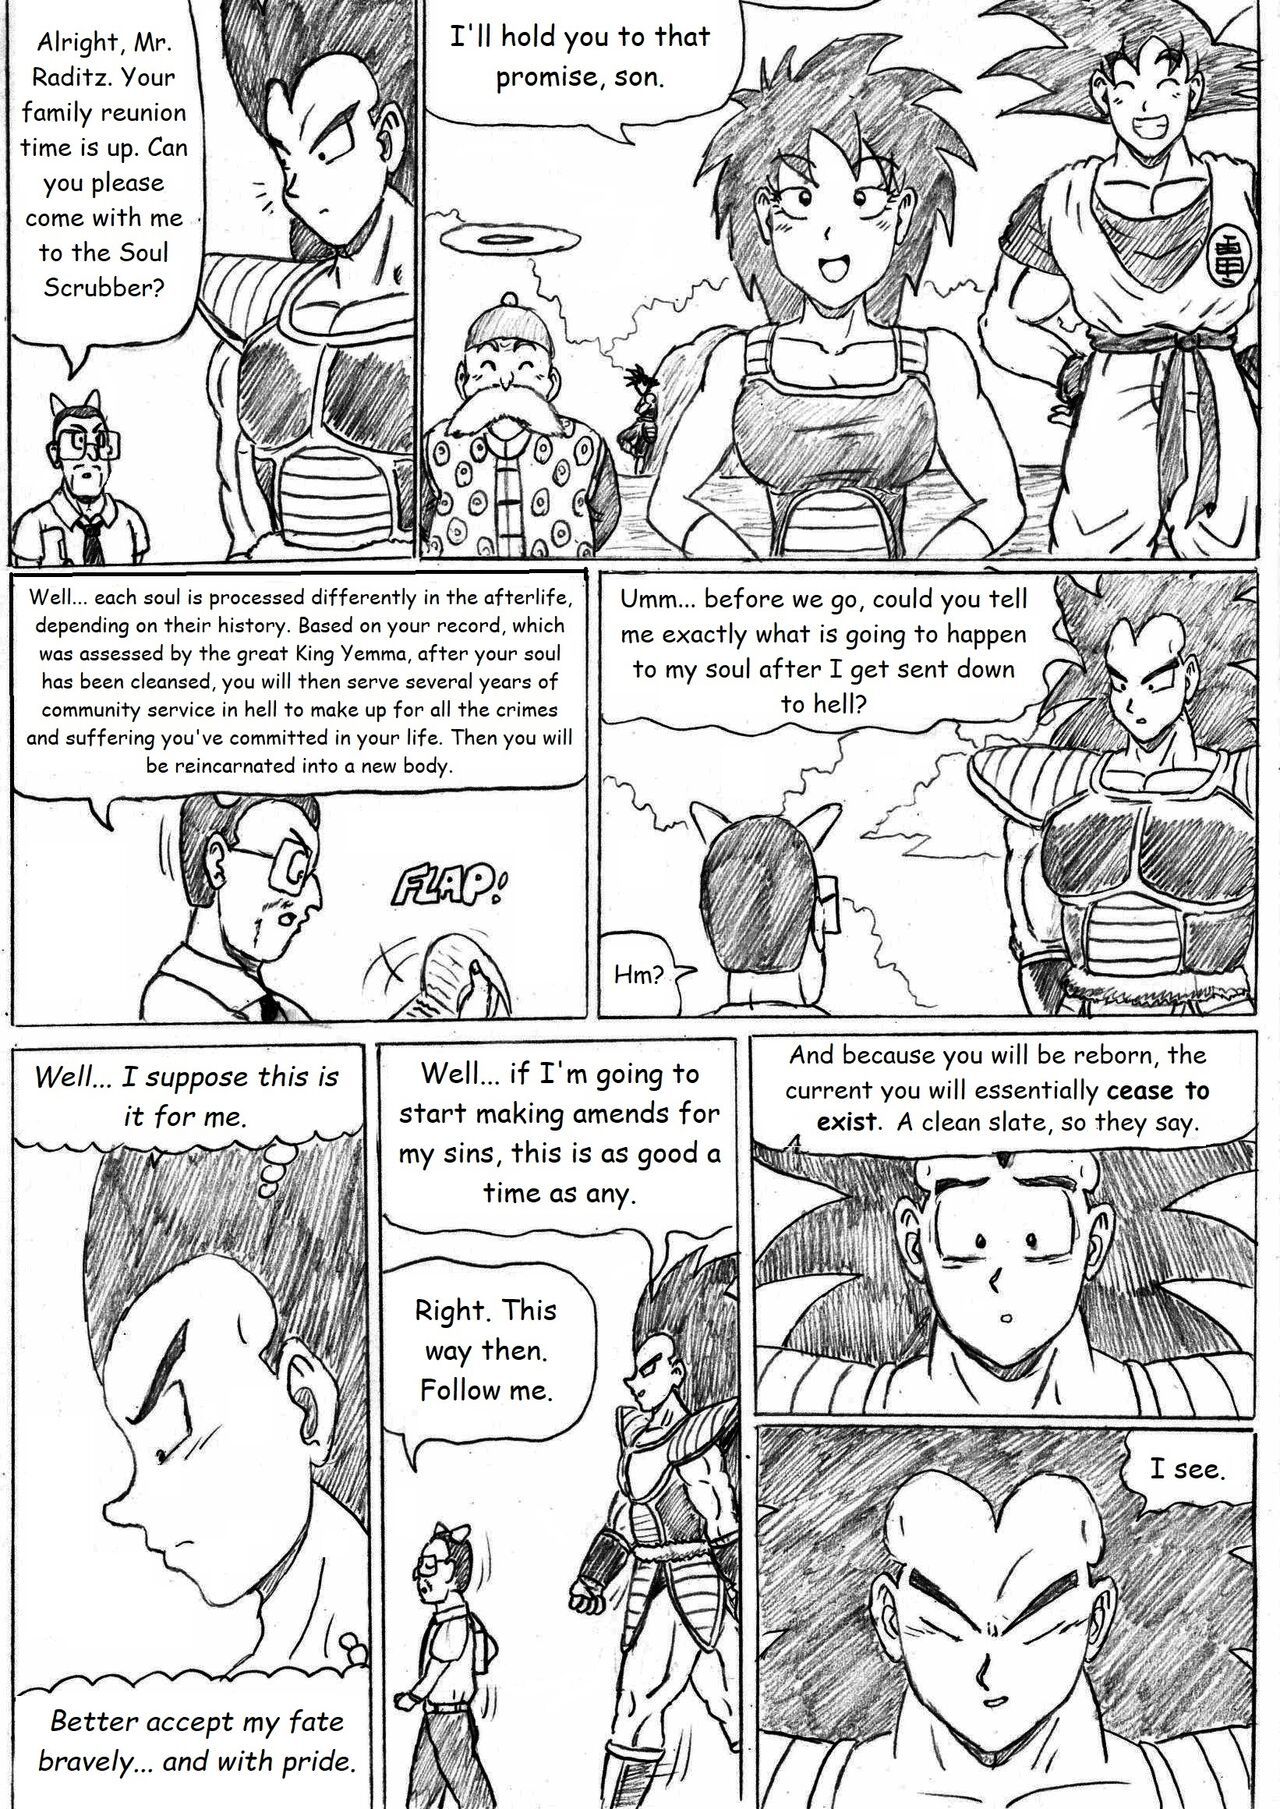 [TheWriteFiction] Dragonball Z Golden Age - Chapter 5 - Teamwork (Ongoing) 11